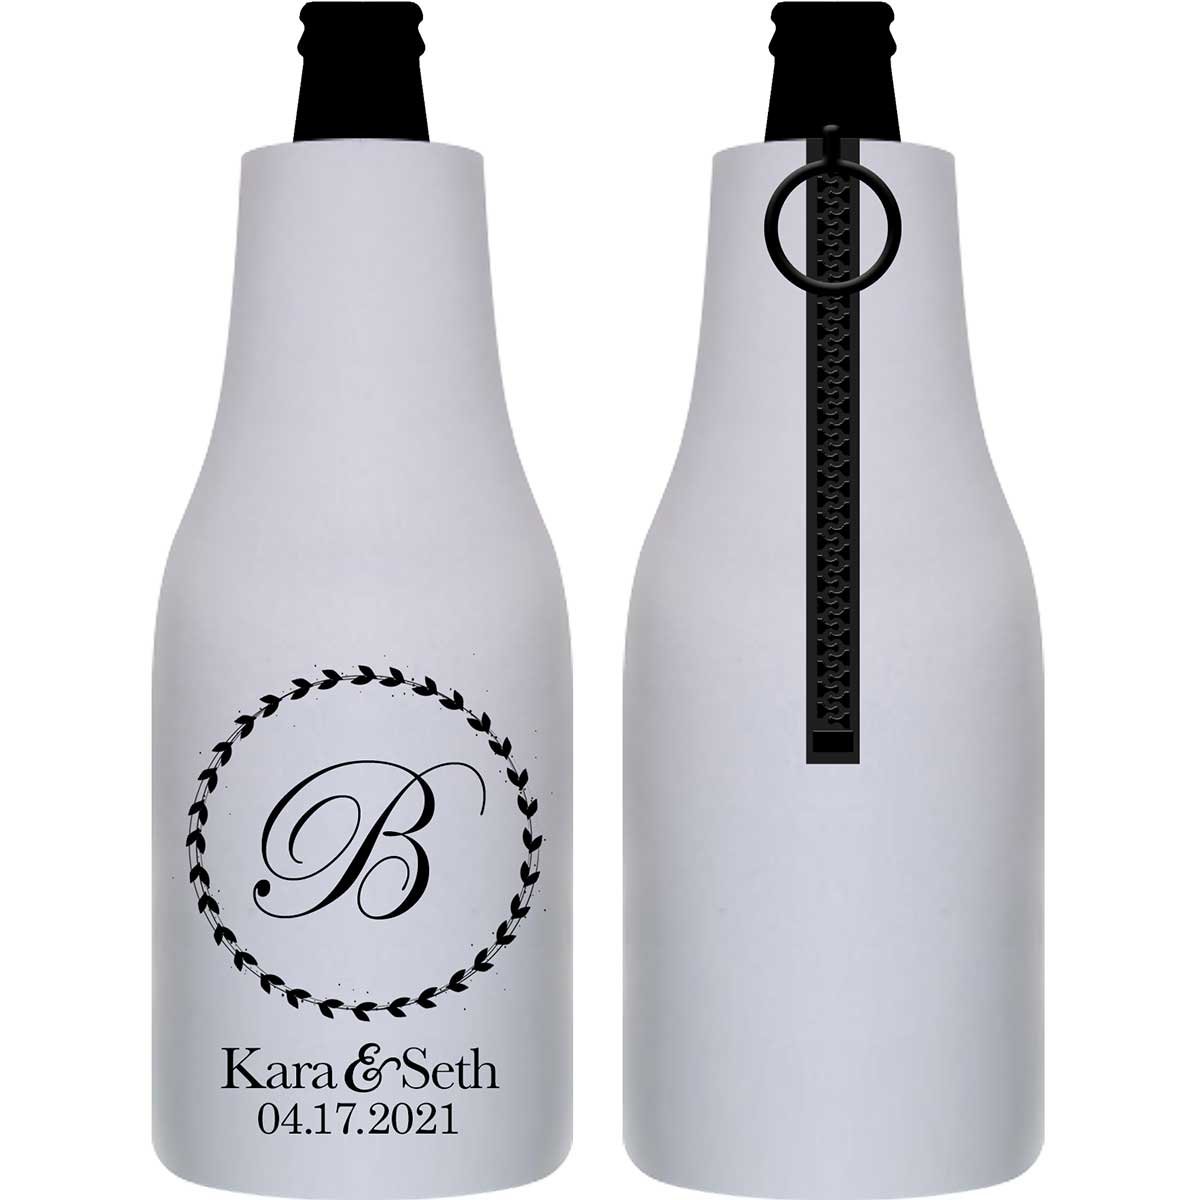 Classic Wedding Design 5A Foldable Zippered Bottle Koozies Wedding Gifts for Guests